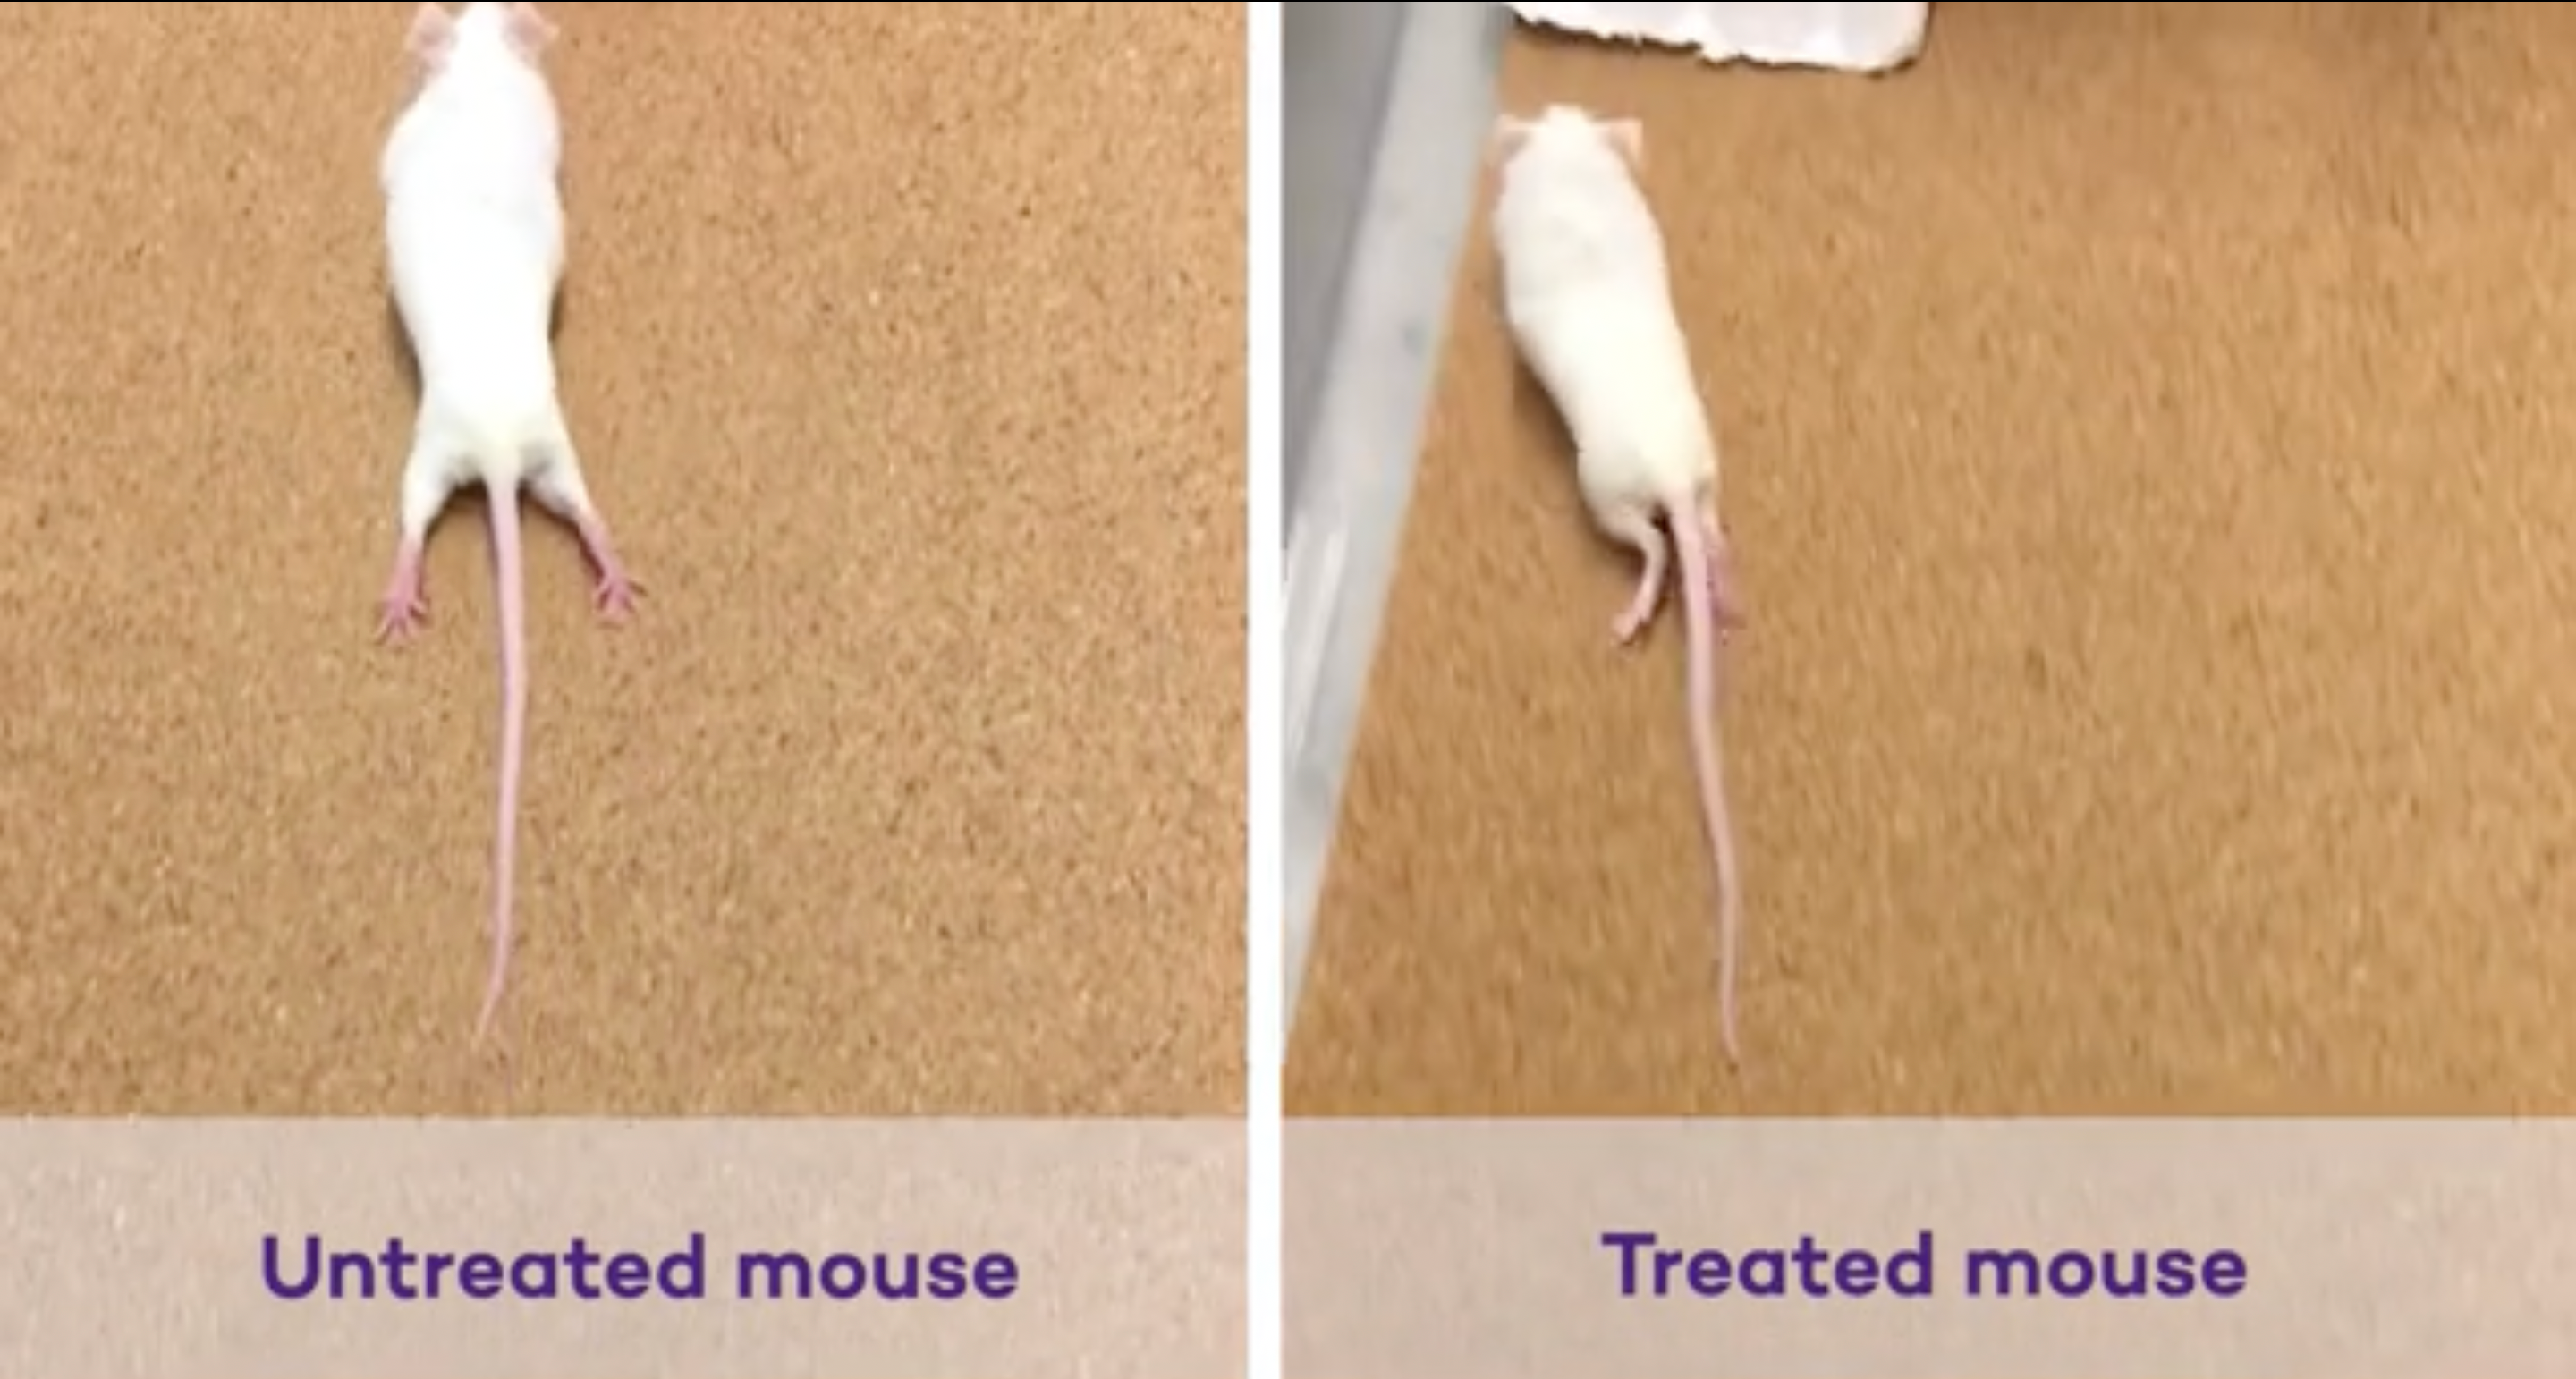 Paralysed mouse (left) drags its hind legs, compared to a mouse that has regained its ability to move its legs after therapy